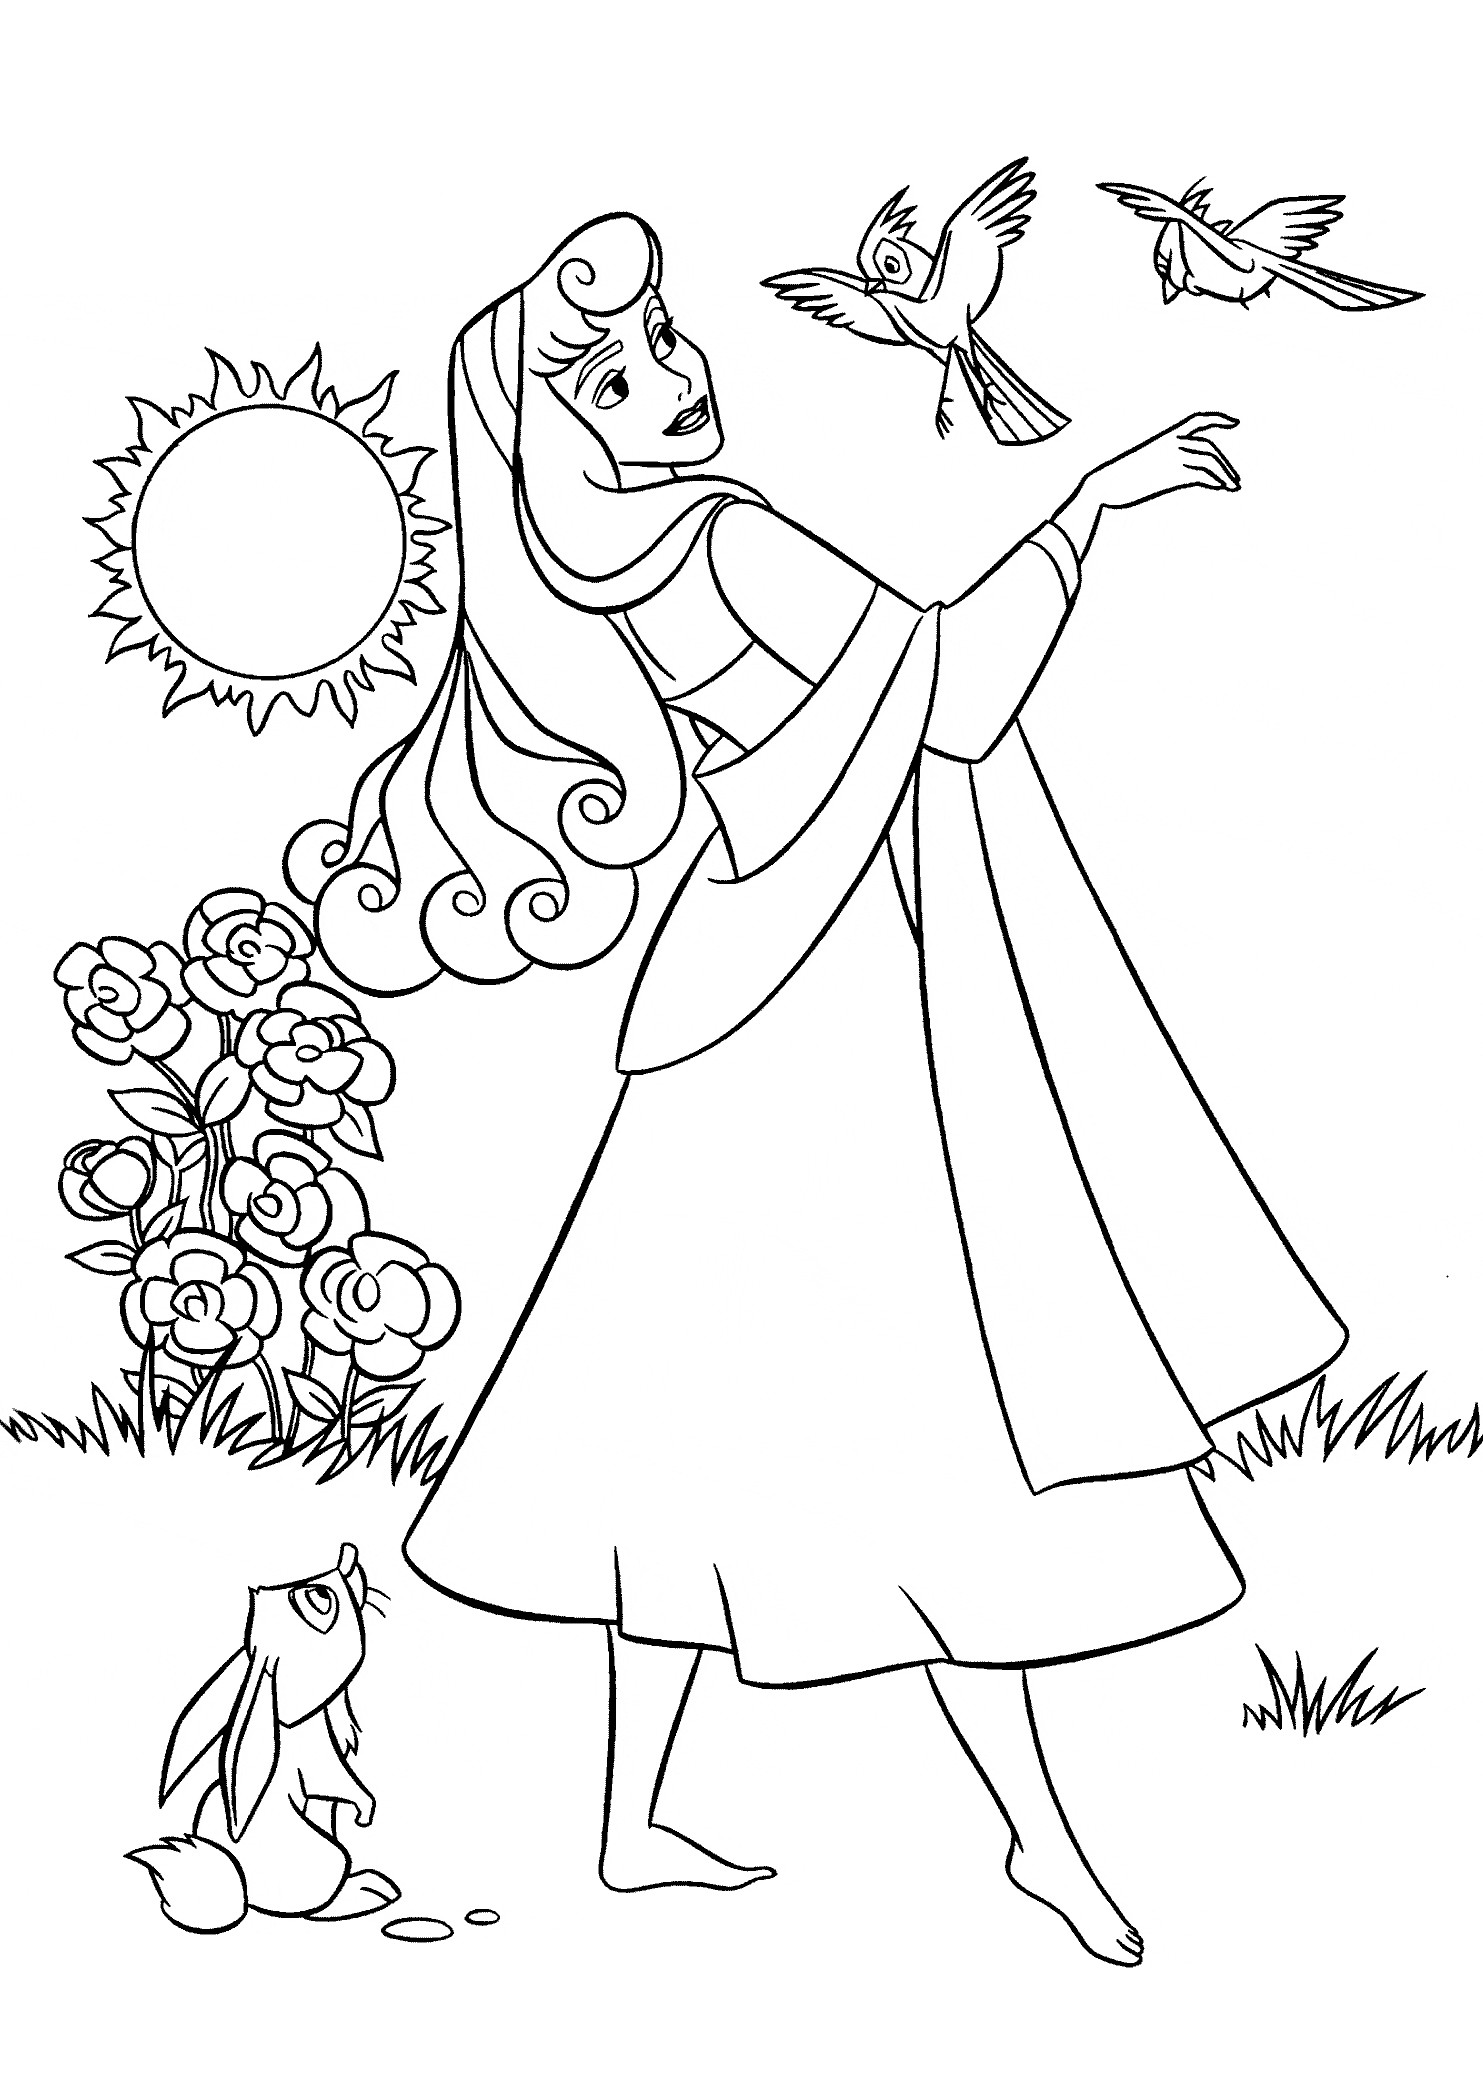 Sleeping Beauty coloring pages for kids printable free